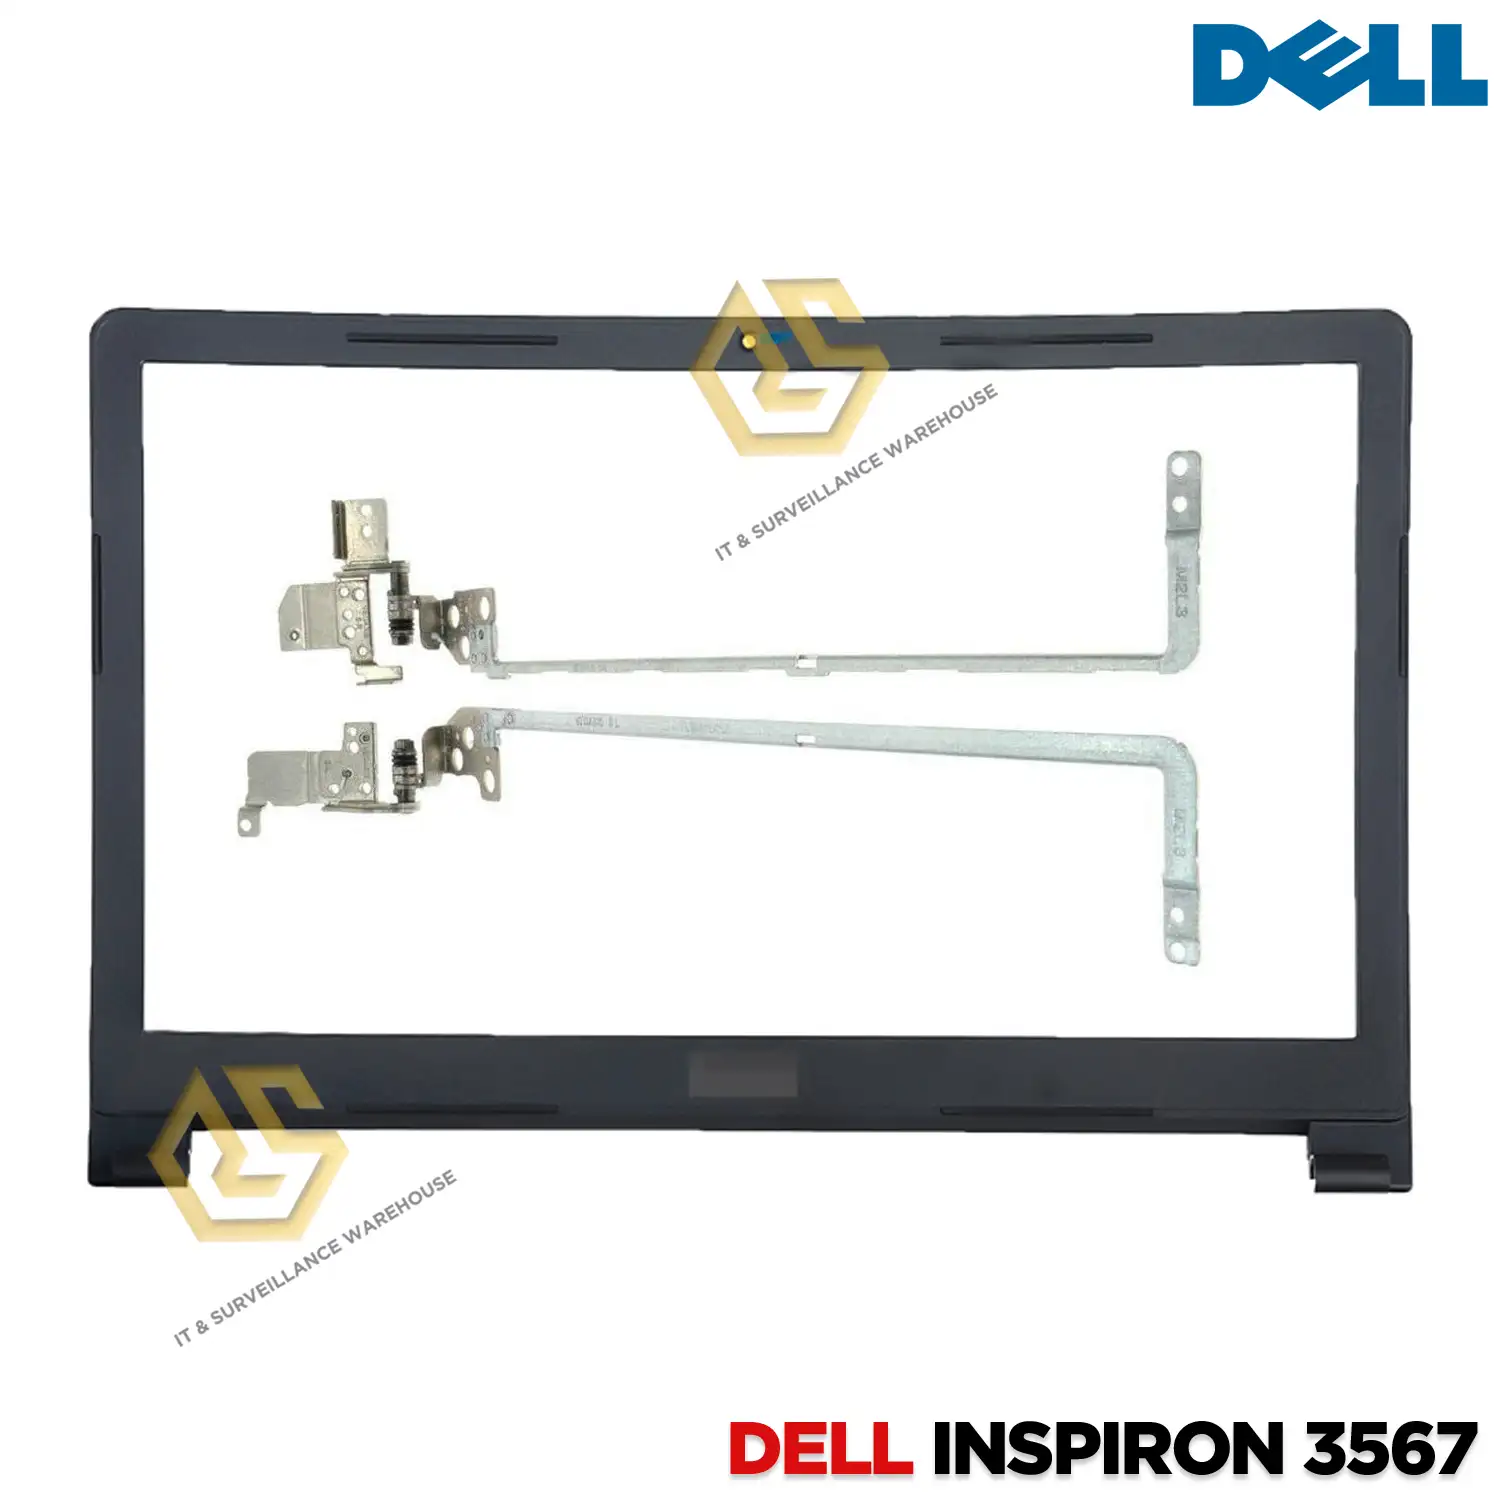 LAPTOP PANEL FOR DELL 3567